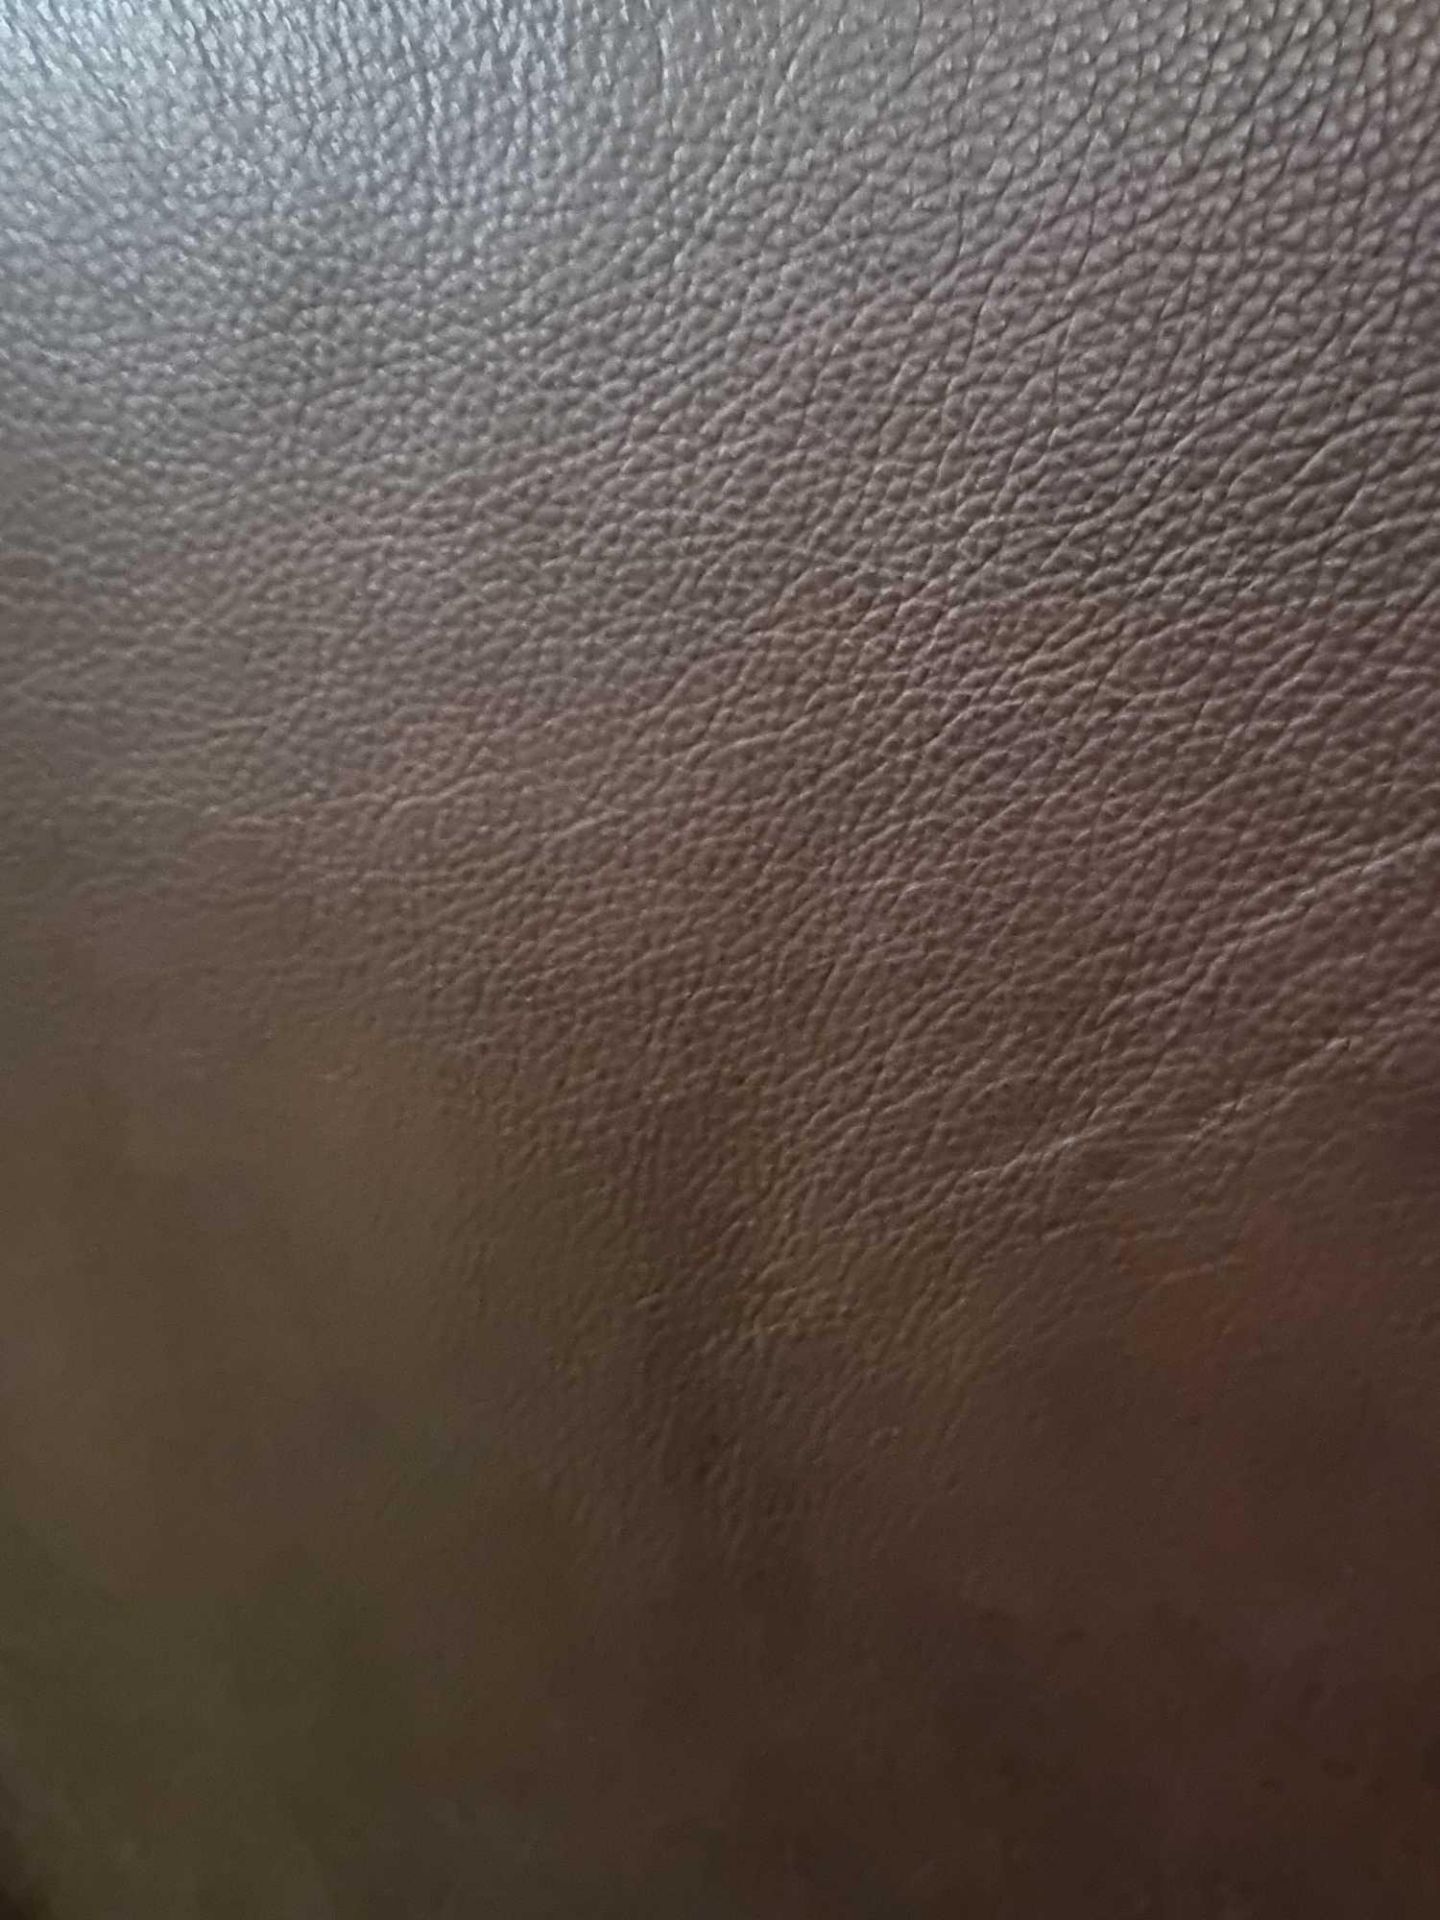 Mastrotto Hudson Chocolate Leather Hide approximately 4.75mÂ² 2.5 x 1.9cm - Image 2 of 3